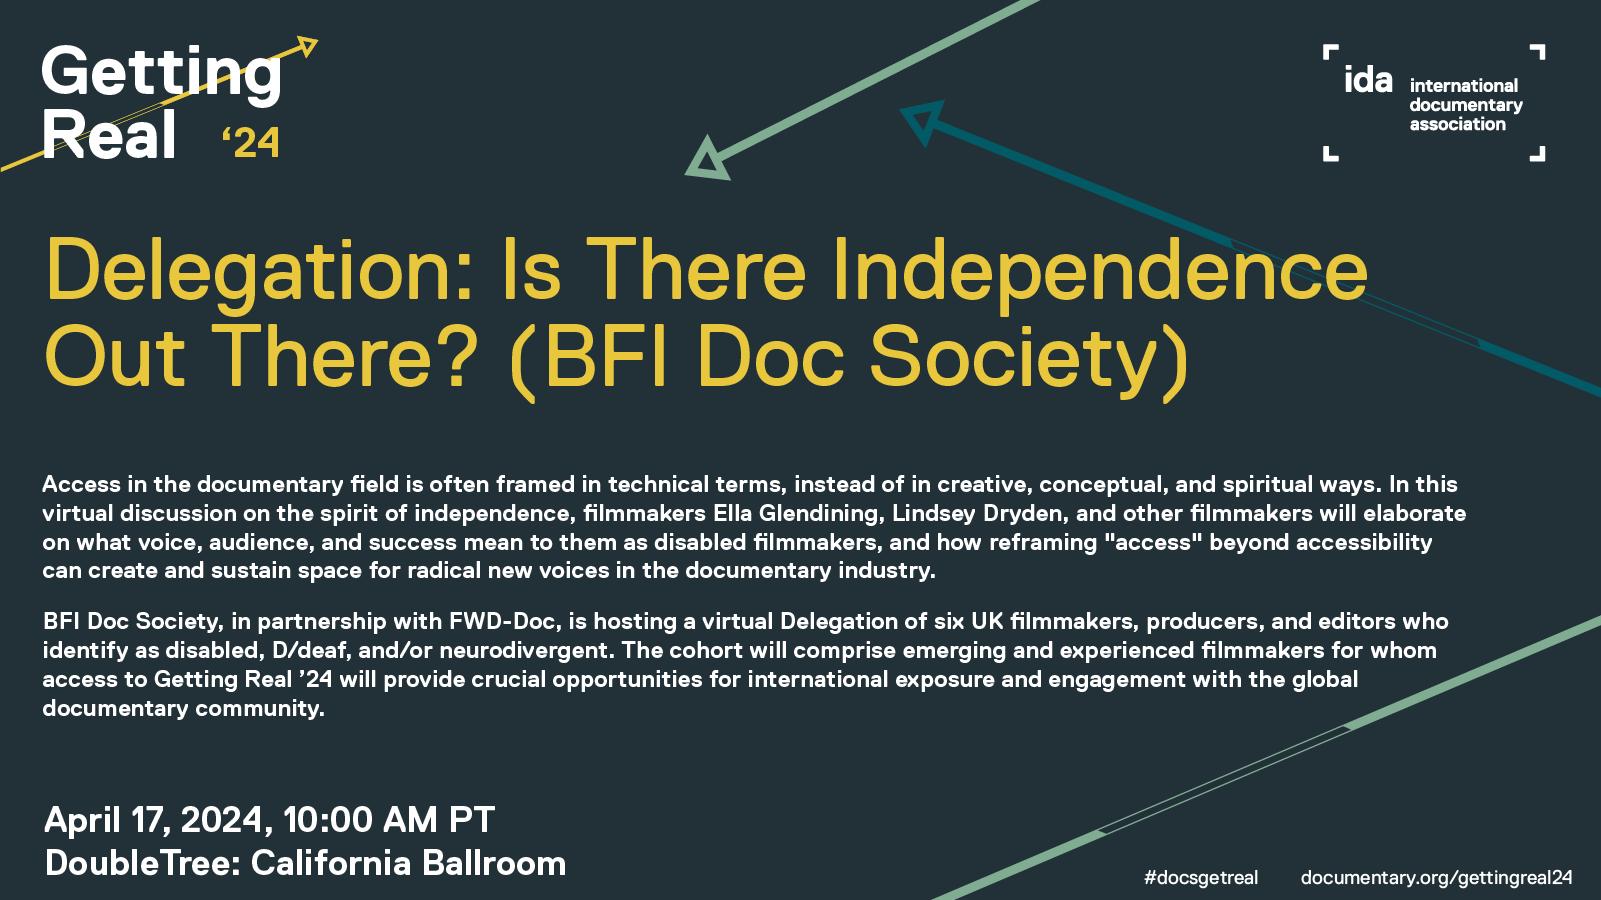 10AM Delegation: Is There Independence Out There? (BFI Doc Society)